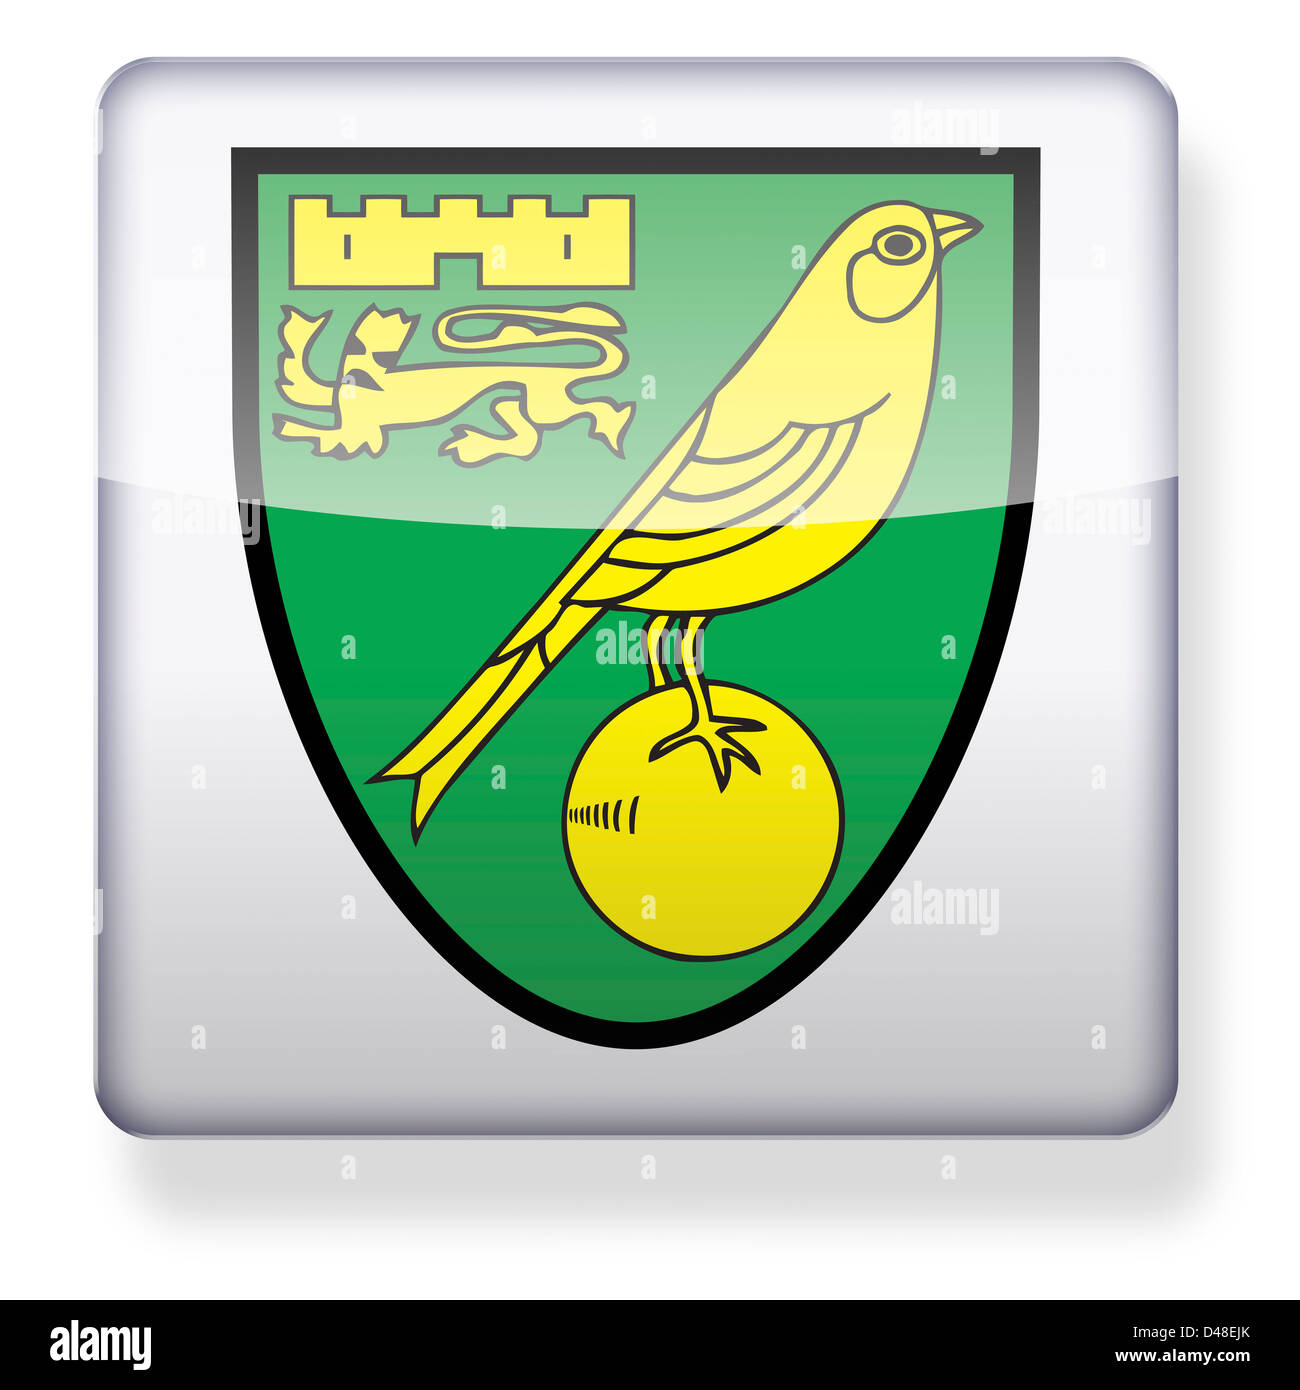 Norwich City football club logo as an app icon. Clipping path included. Stock Photo